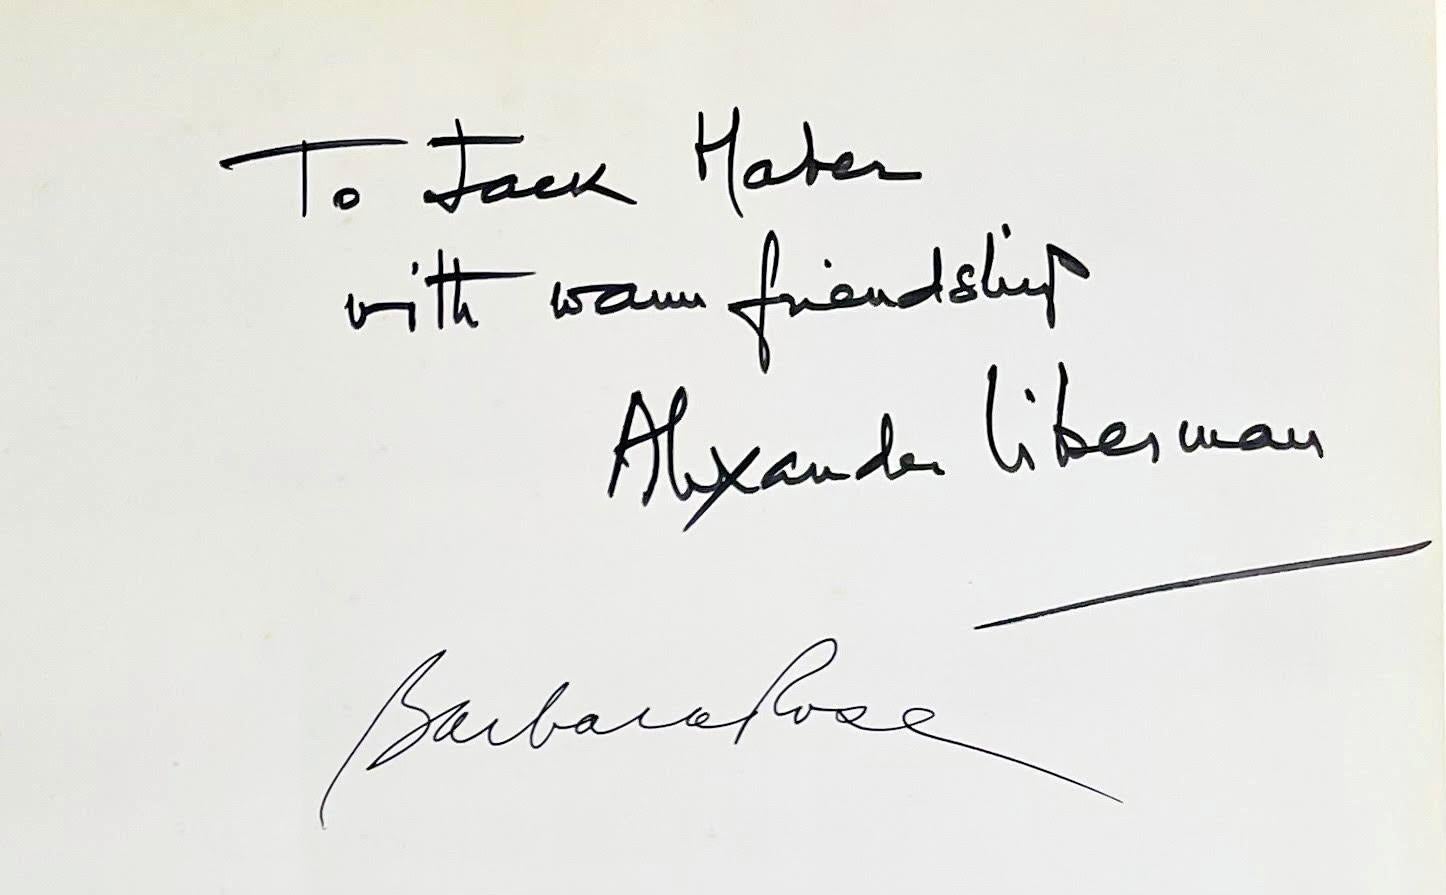 Alexander Liberman, hand signed and inscribed by both Alexander Liberman and Barbara Rose, and accompanied by a separate hand signed note, 1981
Hardback monograph (hand signed and inscribed by Alexander Liberman as well as art historian Barbara